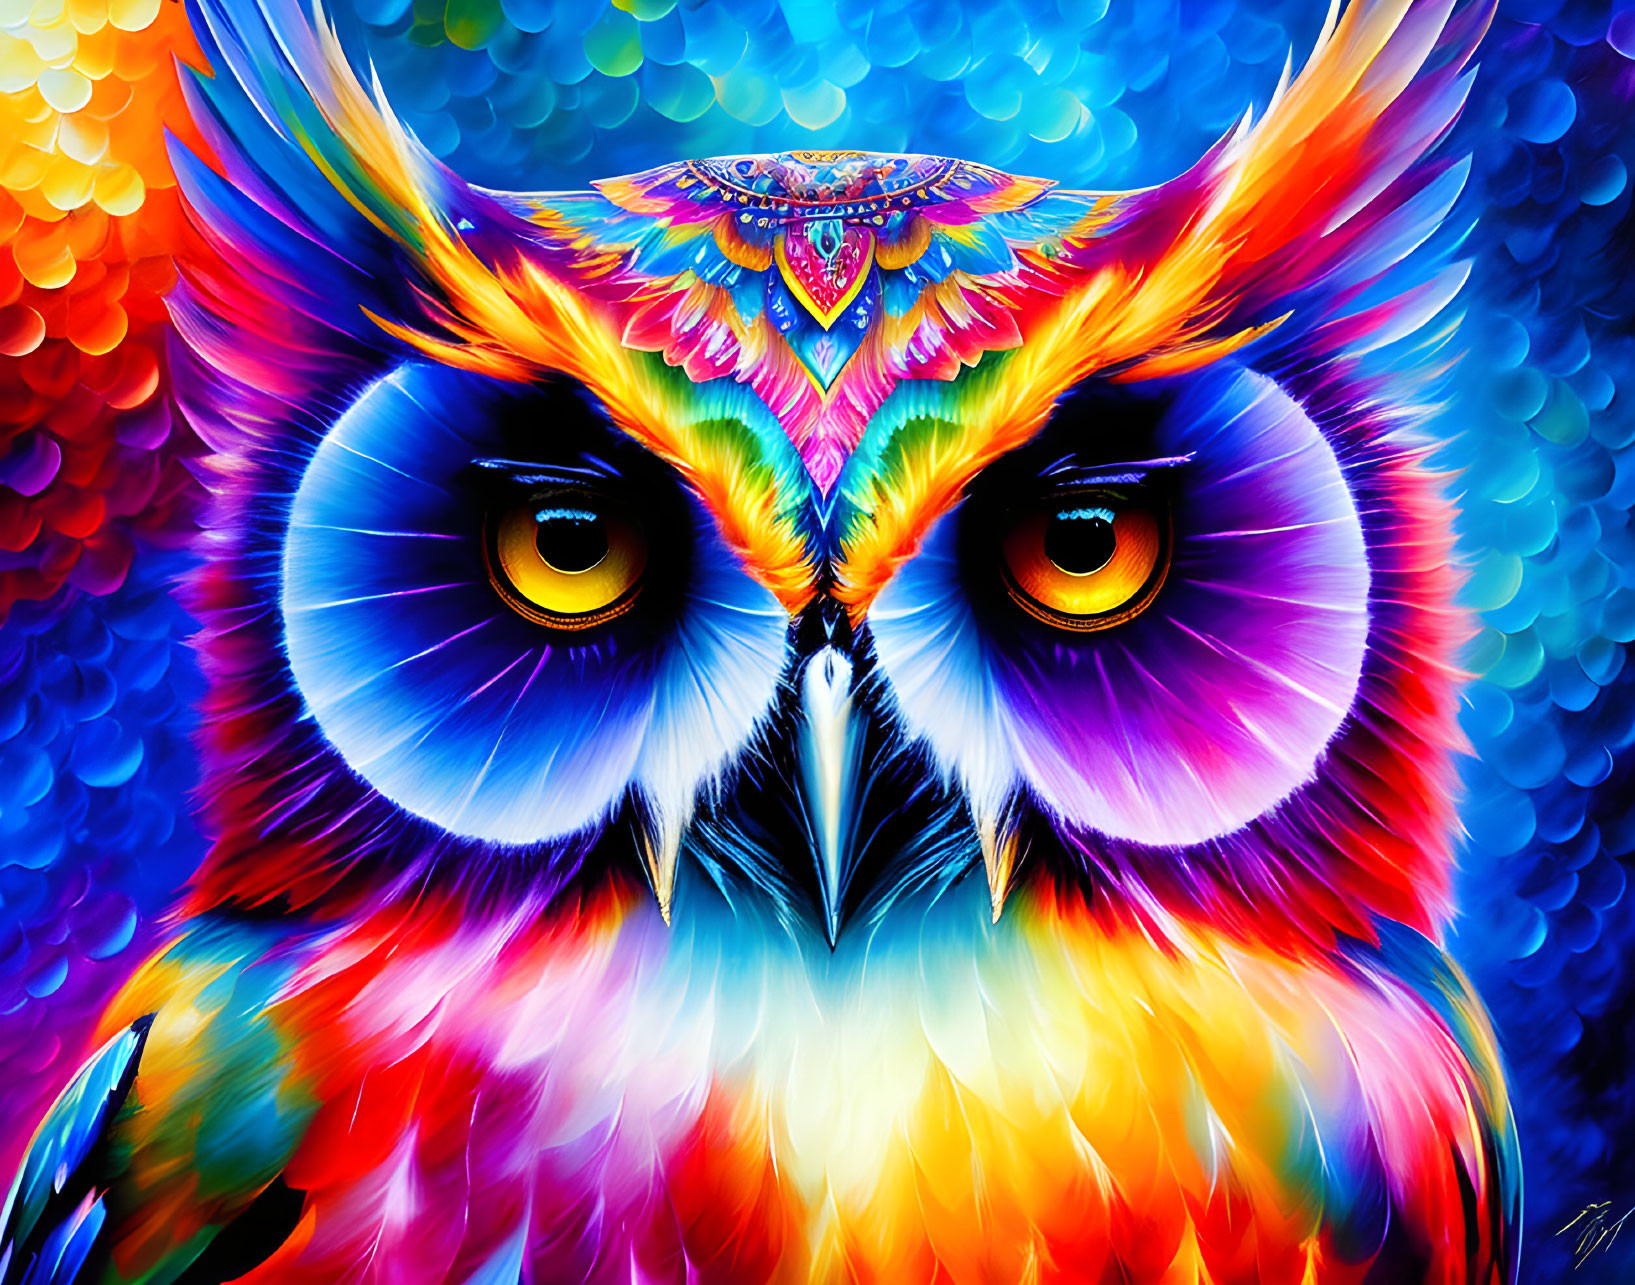 Colorful Owl Digital Painting with Intricate Forehead Pattern